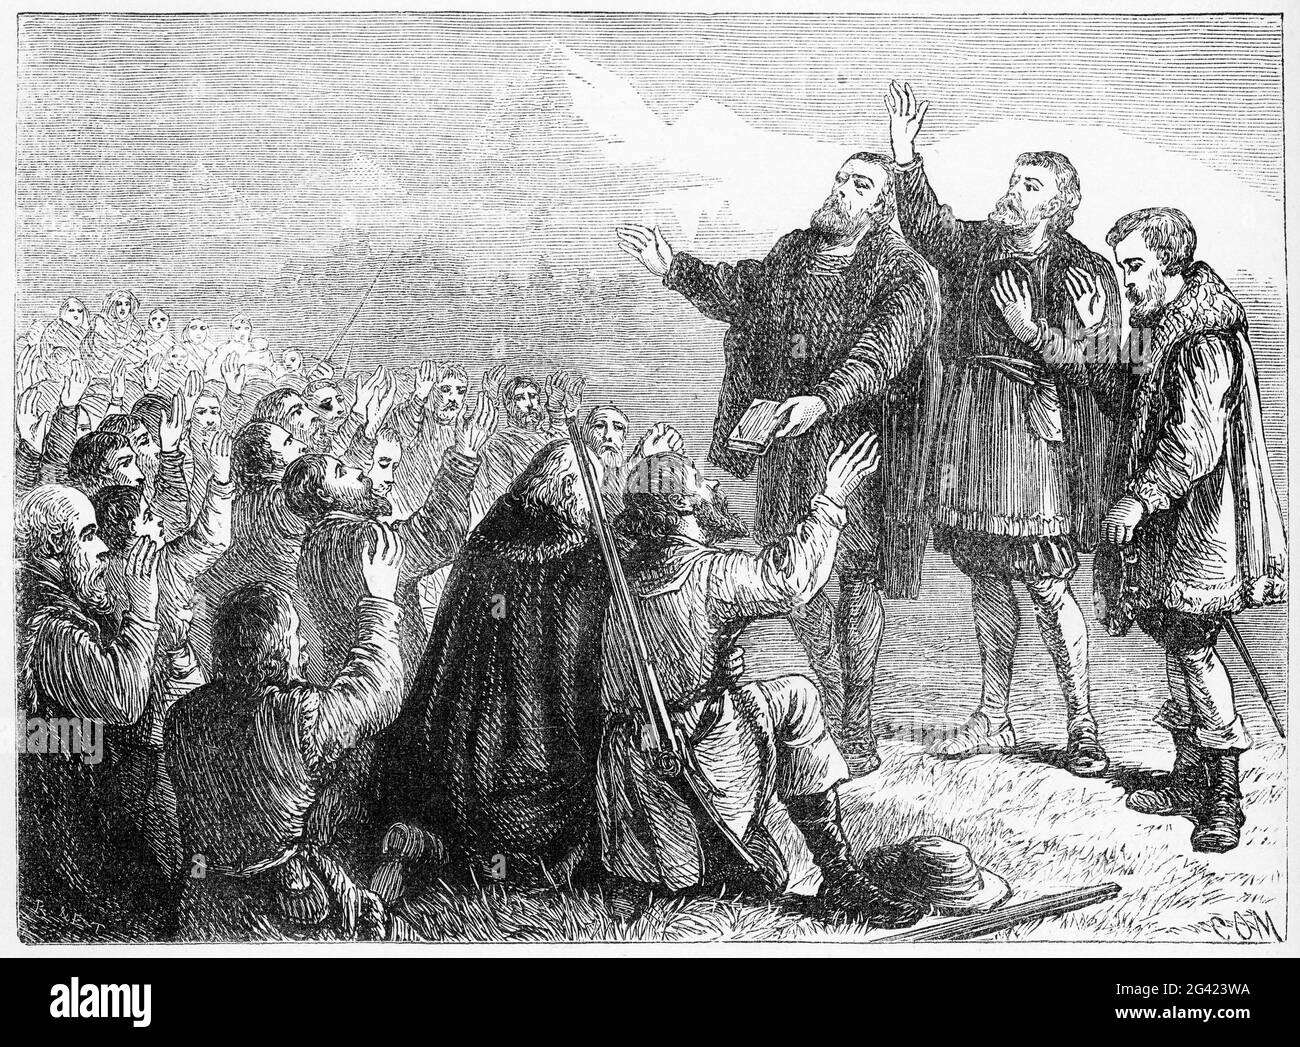 Engraving of the Vaudois taking an oath of alliance with other Protestants in 1561 after the Waldenses had forsaken their ancient beliefs to adopt Protestant doctrines. Stock Photo